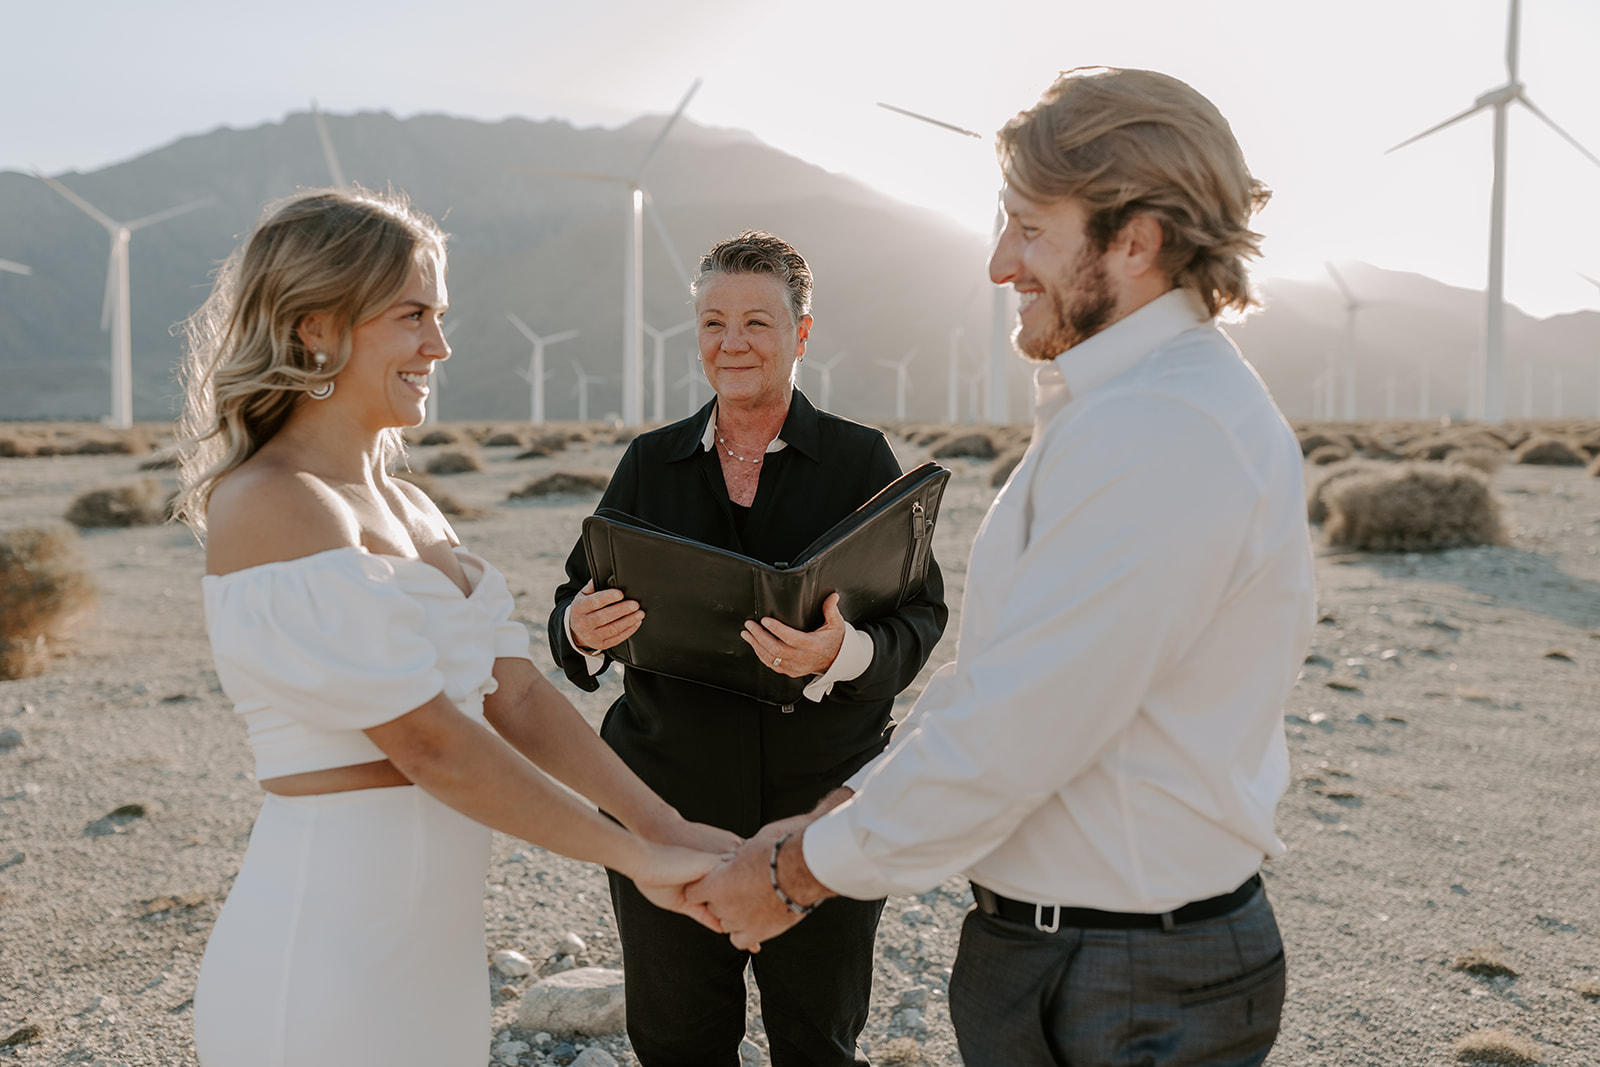 how to become a wedding officiant near me